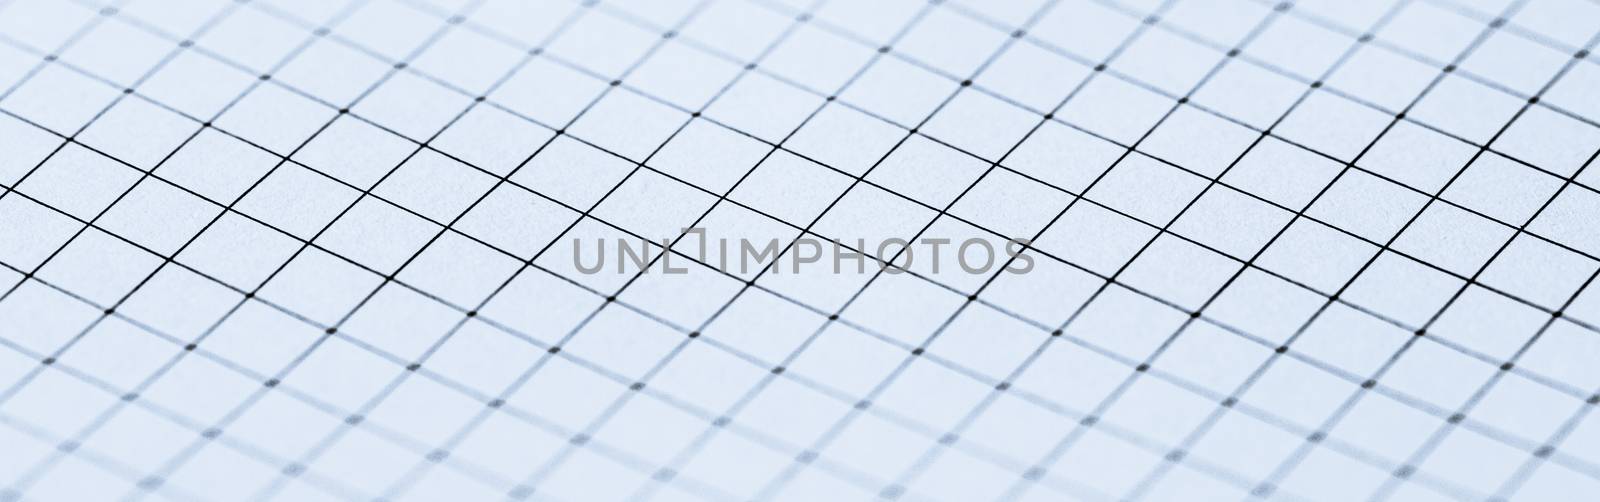 Blue grid paper texture, back to school backgrounds